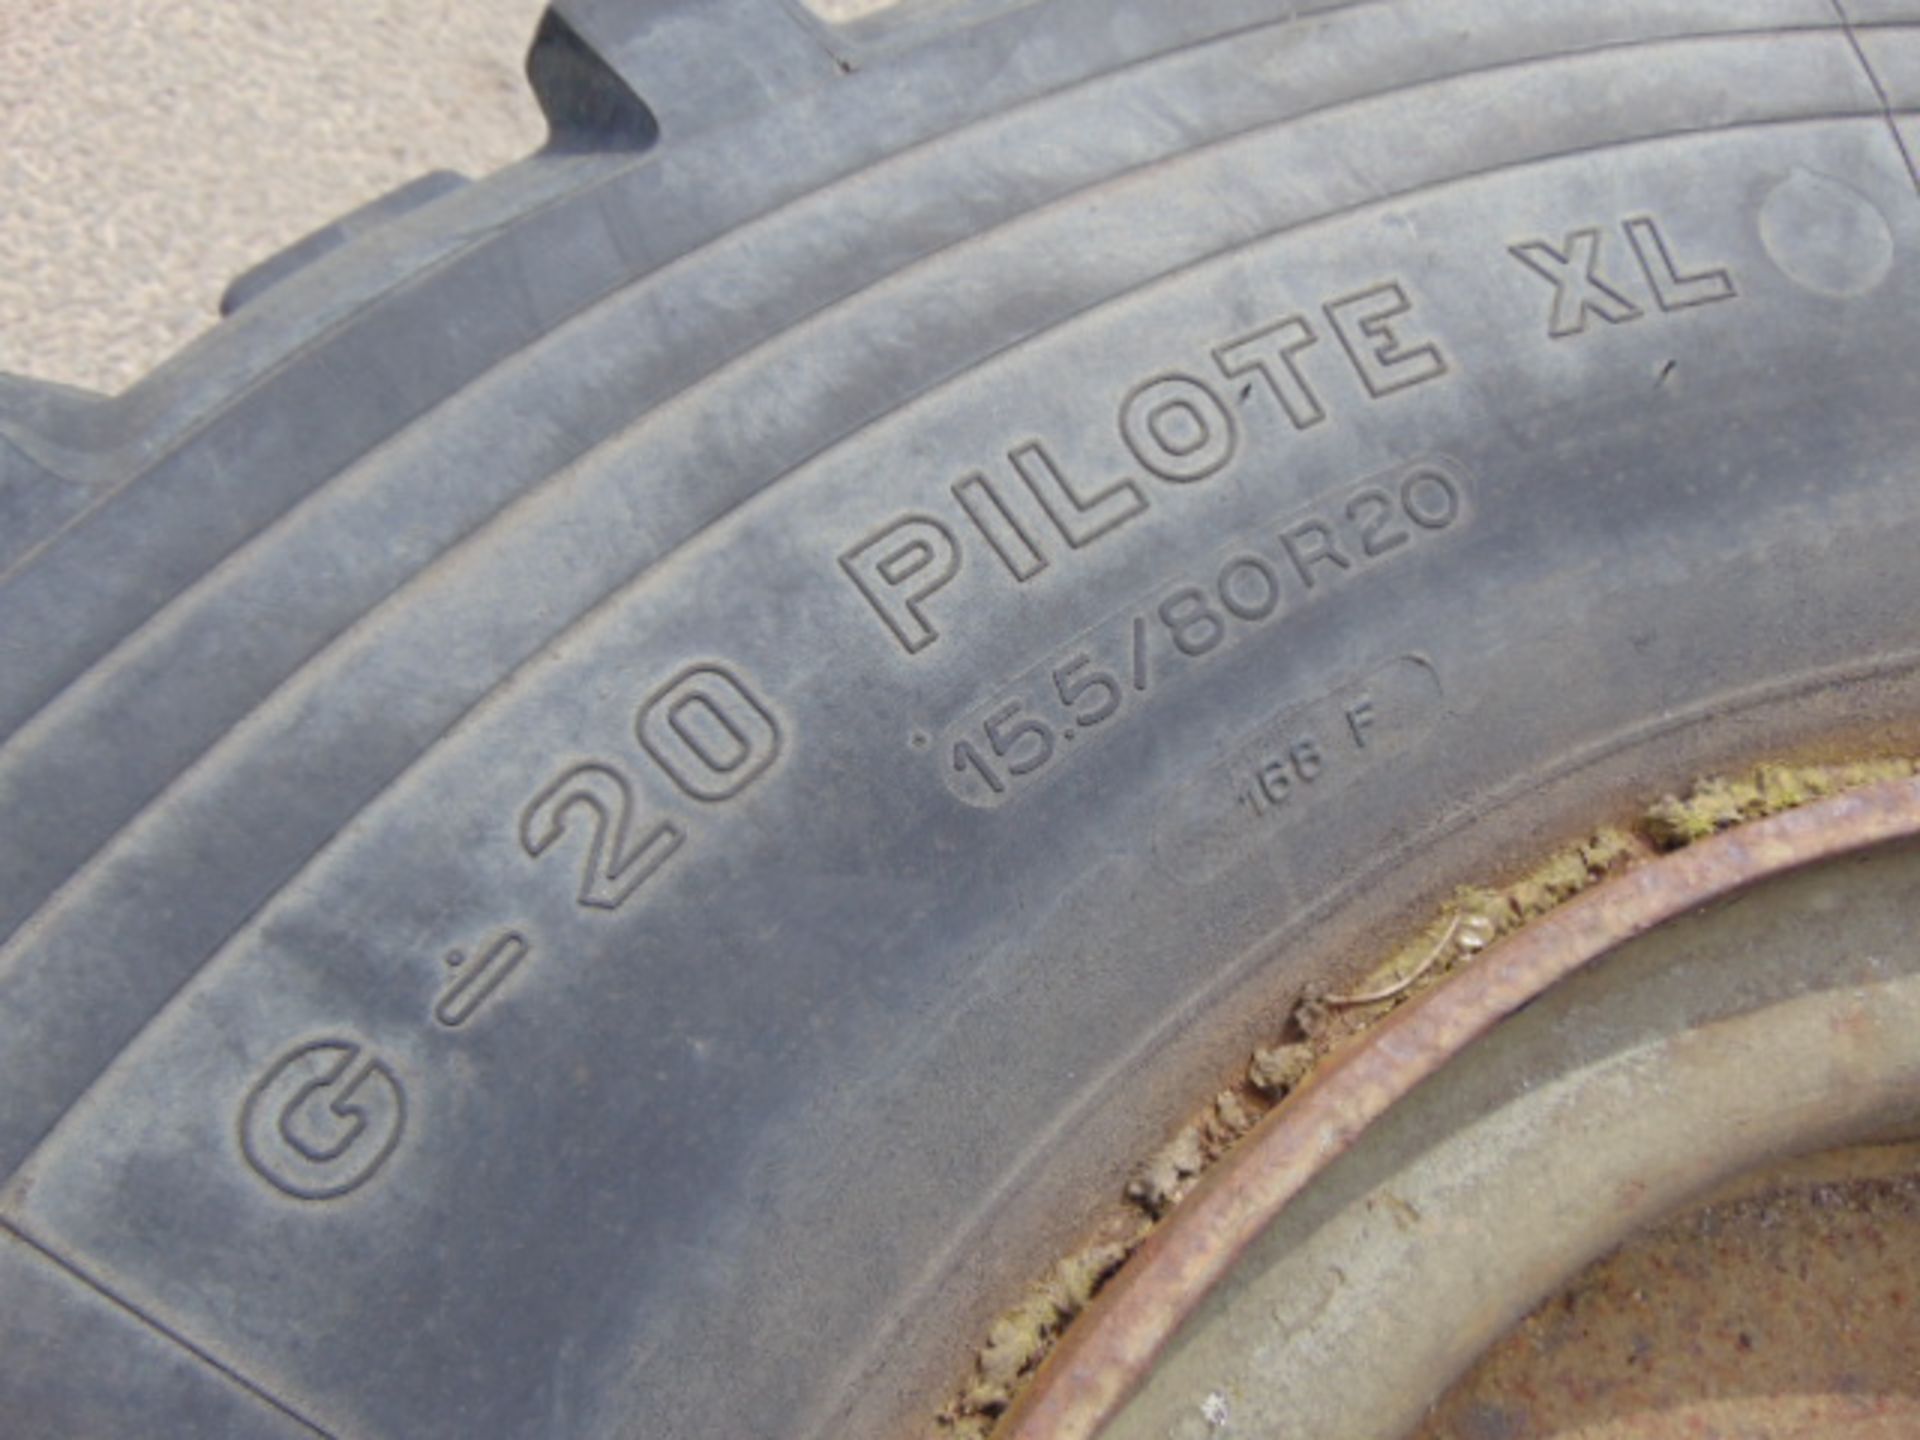 1 x Michelin G-20 Pilote XL 15.5/80 R20 Tyre on 8 stud Rim - Image 6 of 6